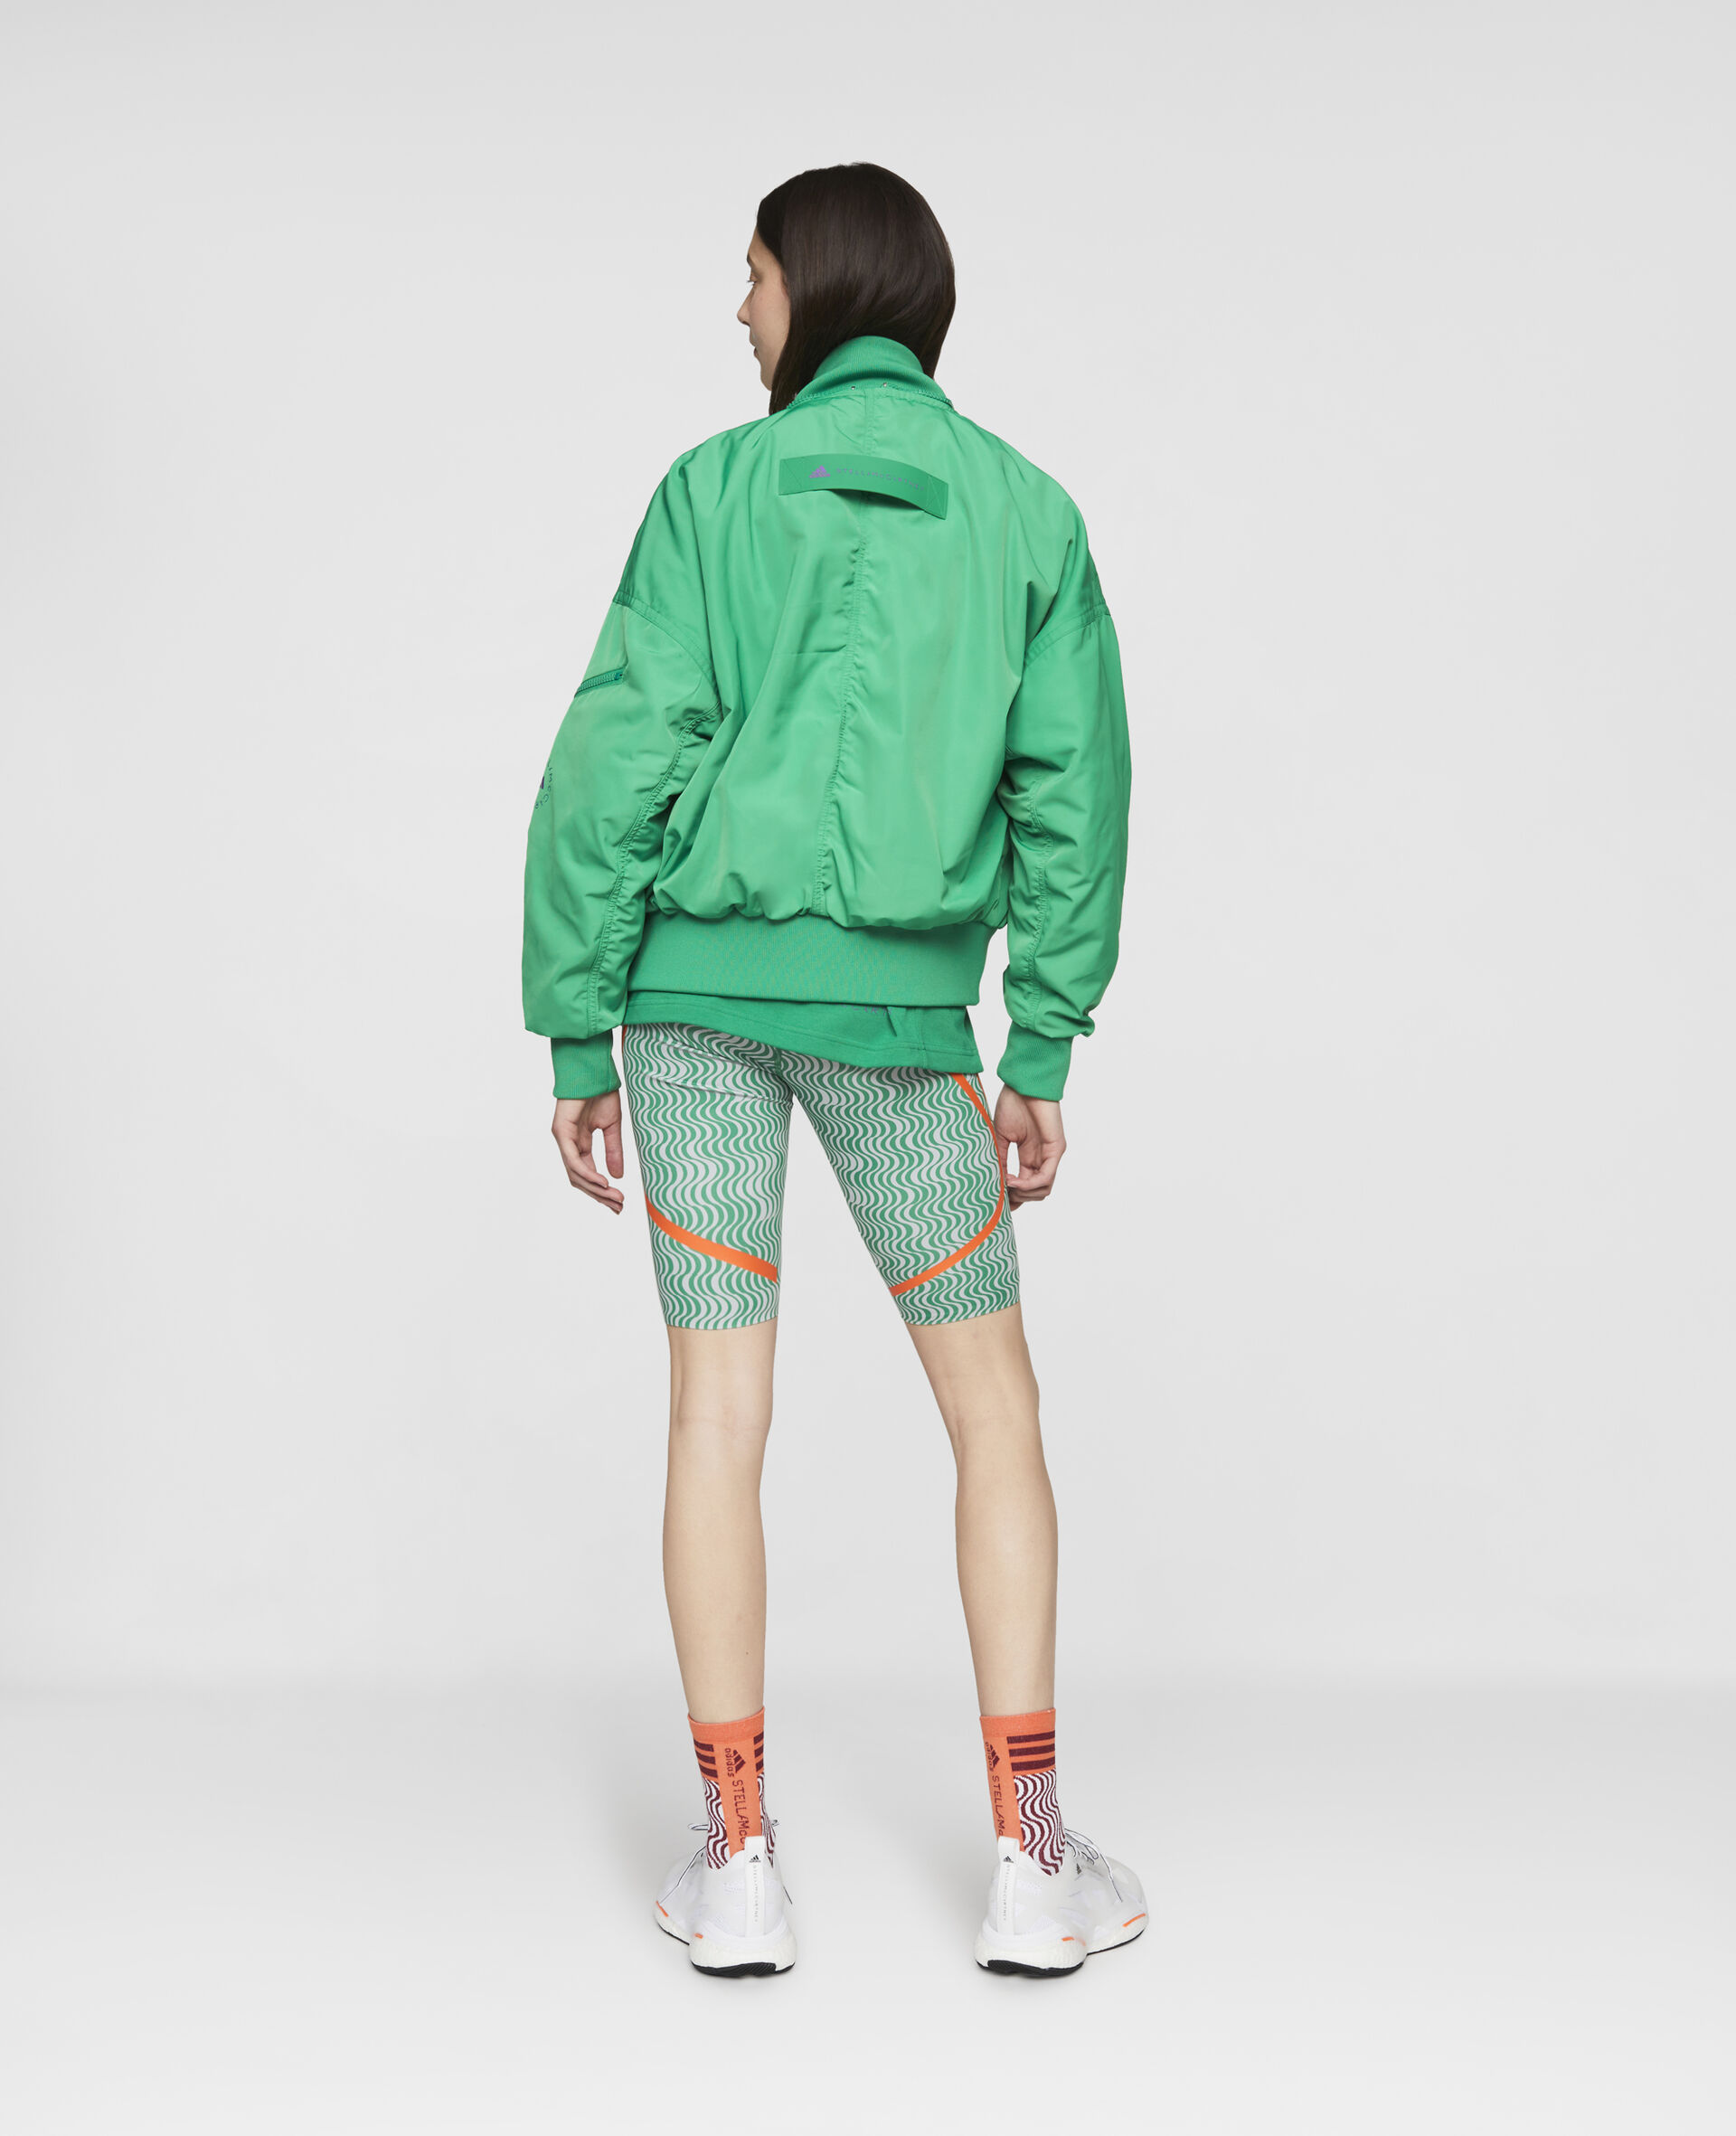 Woven Sportswear Bomber-Green-large image number 2